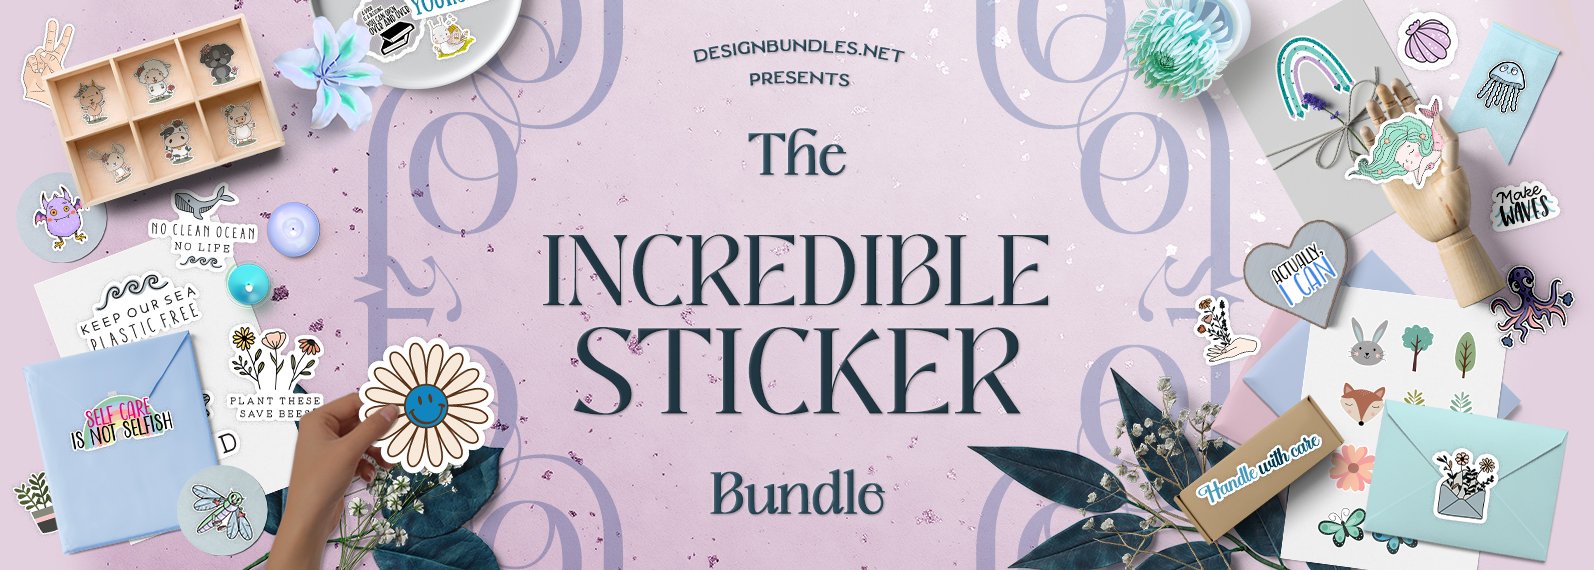 The Incredible Sticker Bundle Cover